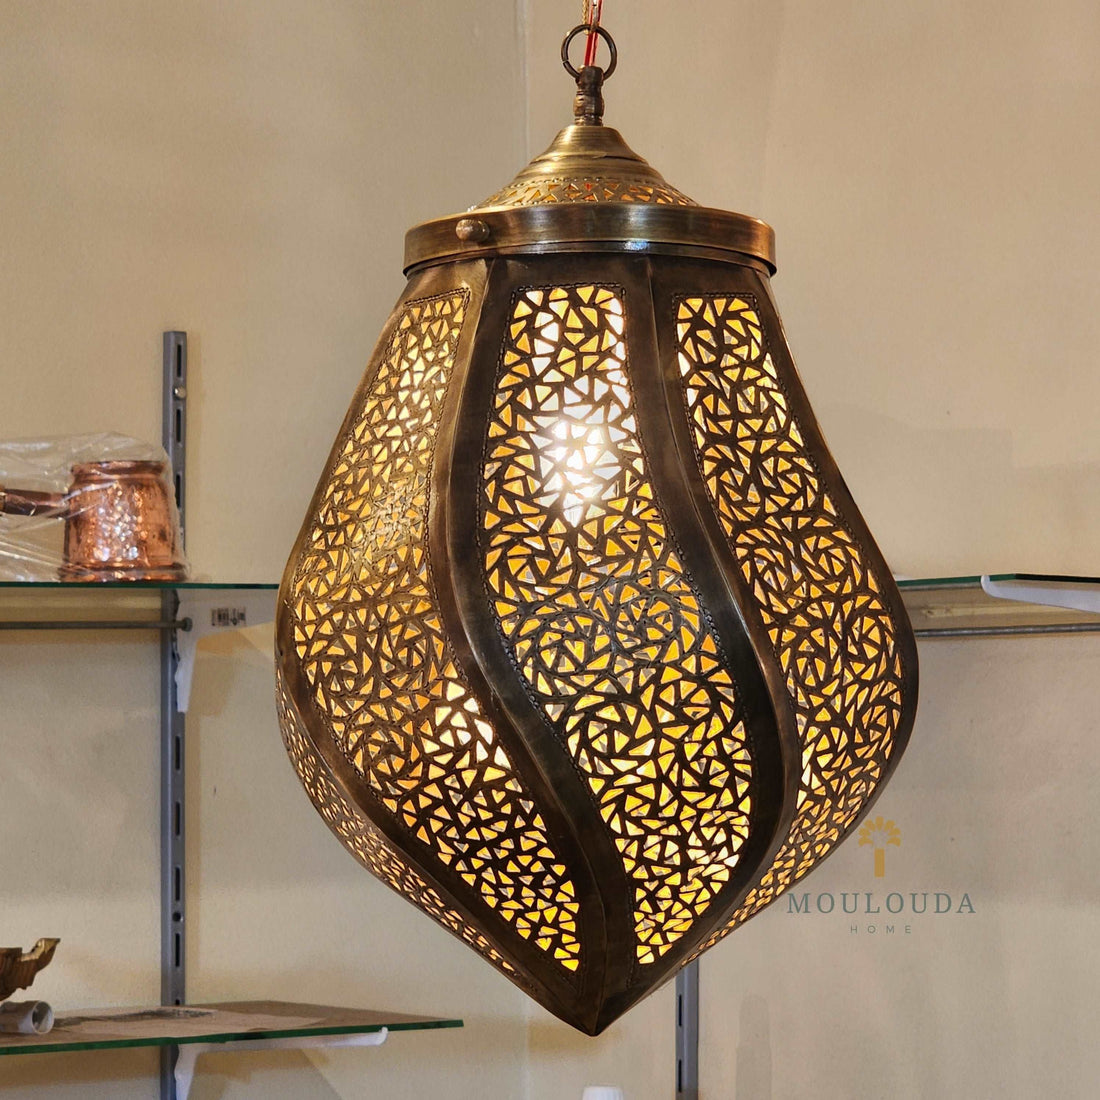 Illuminate Your Home with Mouloudacastle: Luxurious Moroccan Brass Chandeliers